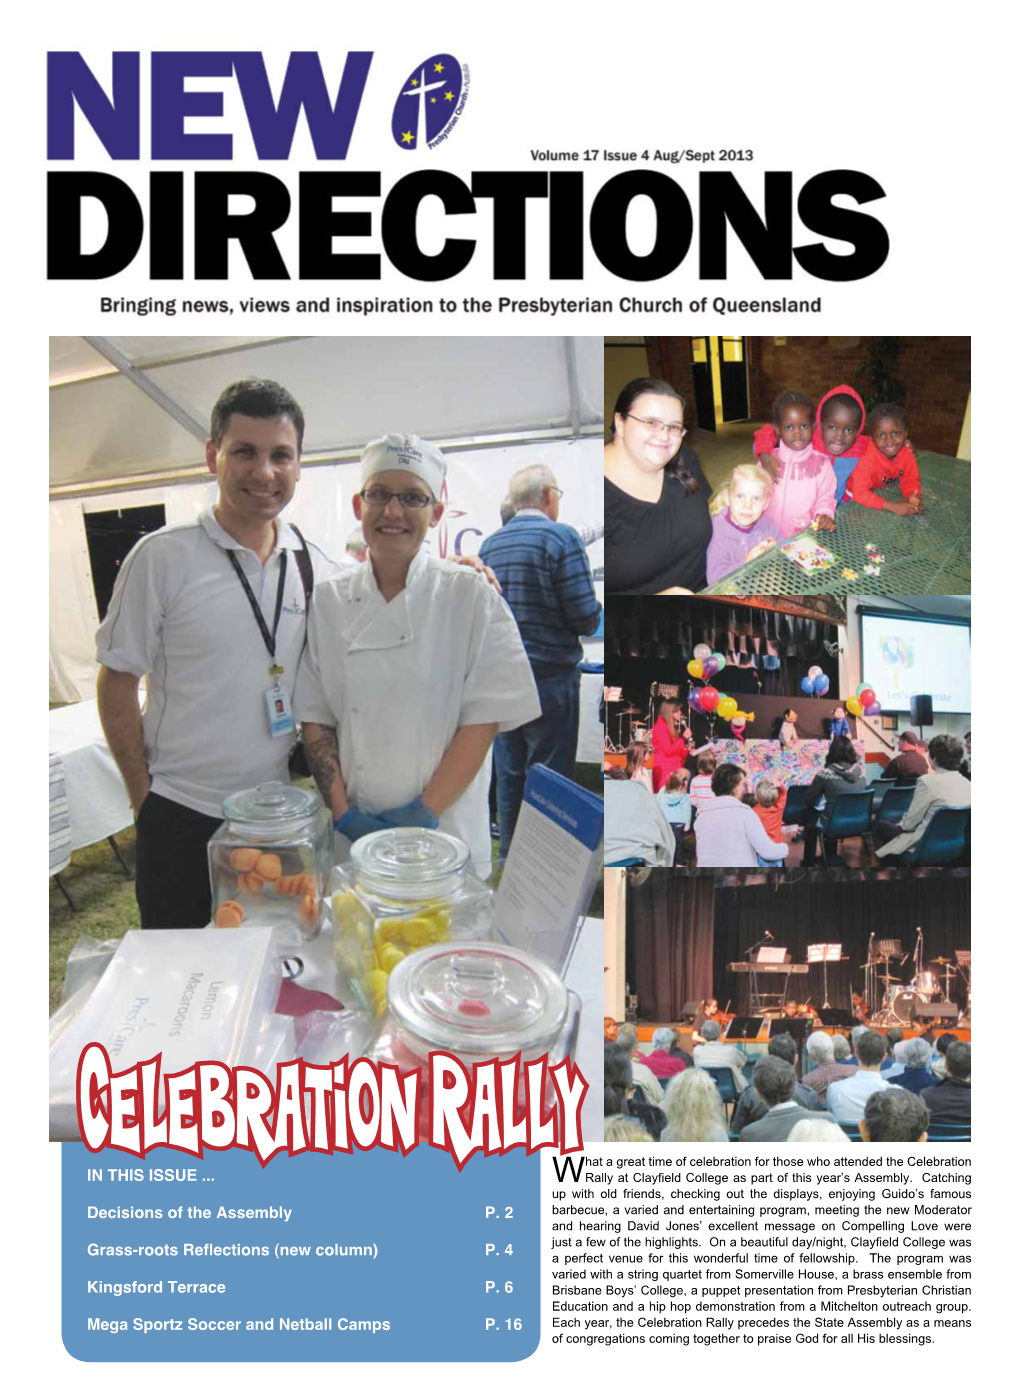 New Directions, August/September 2013 - Page 2 Decisions of the 2013 State Assembly by Rev